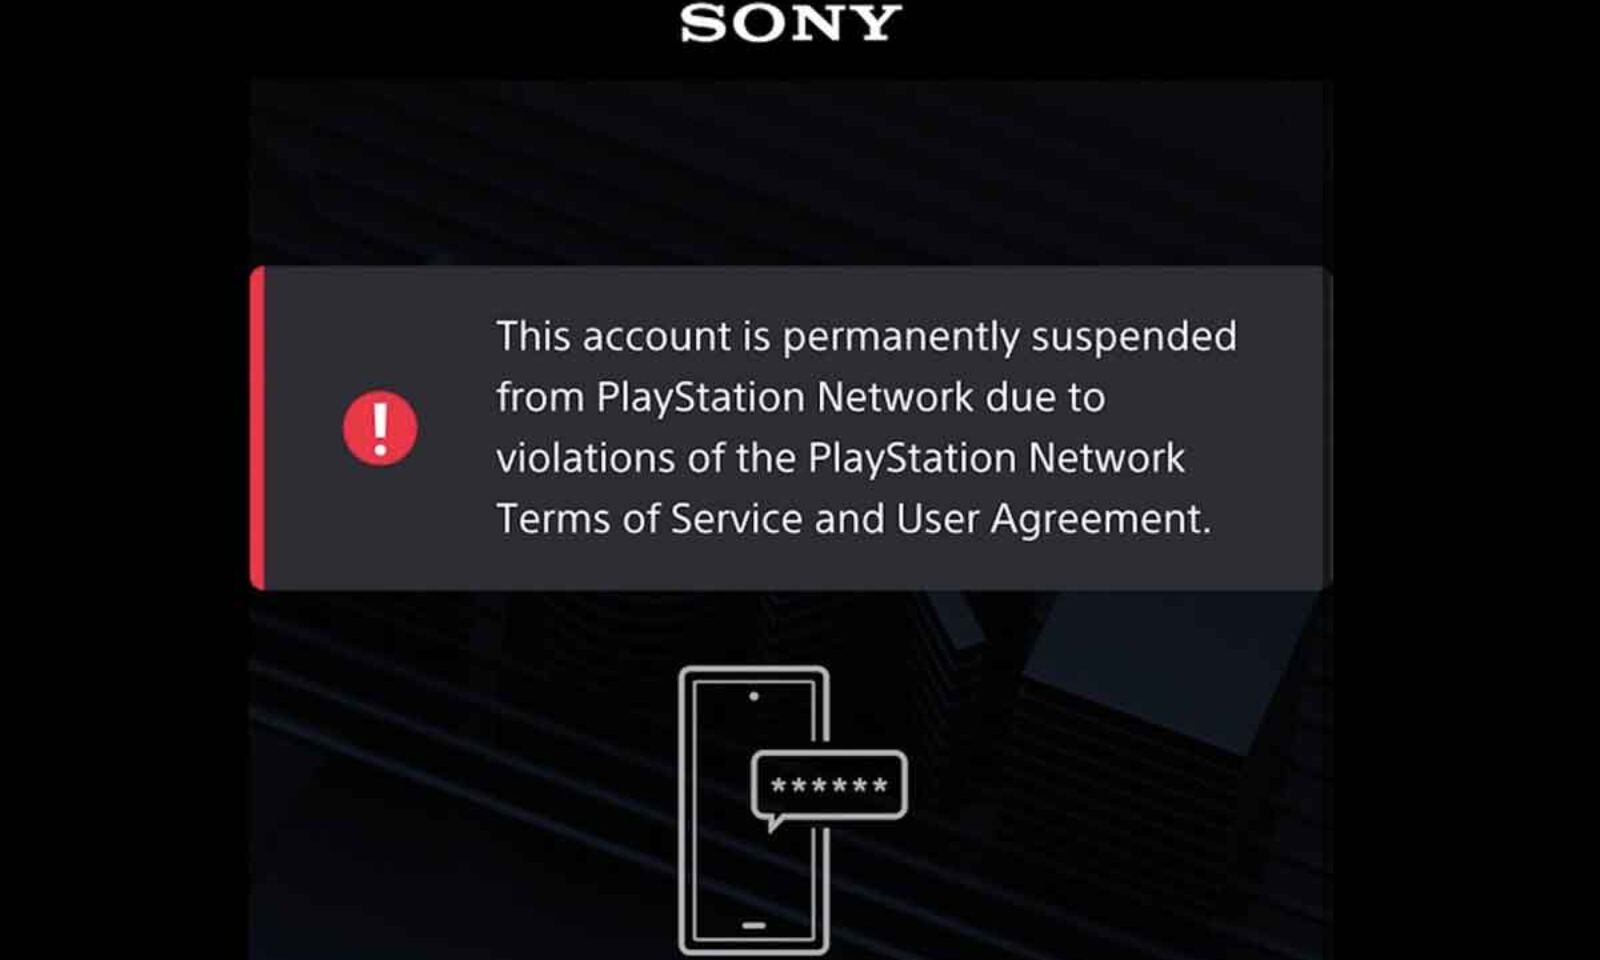 PSN Back Online After Being Hit with Account, Social, and